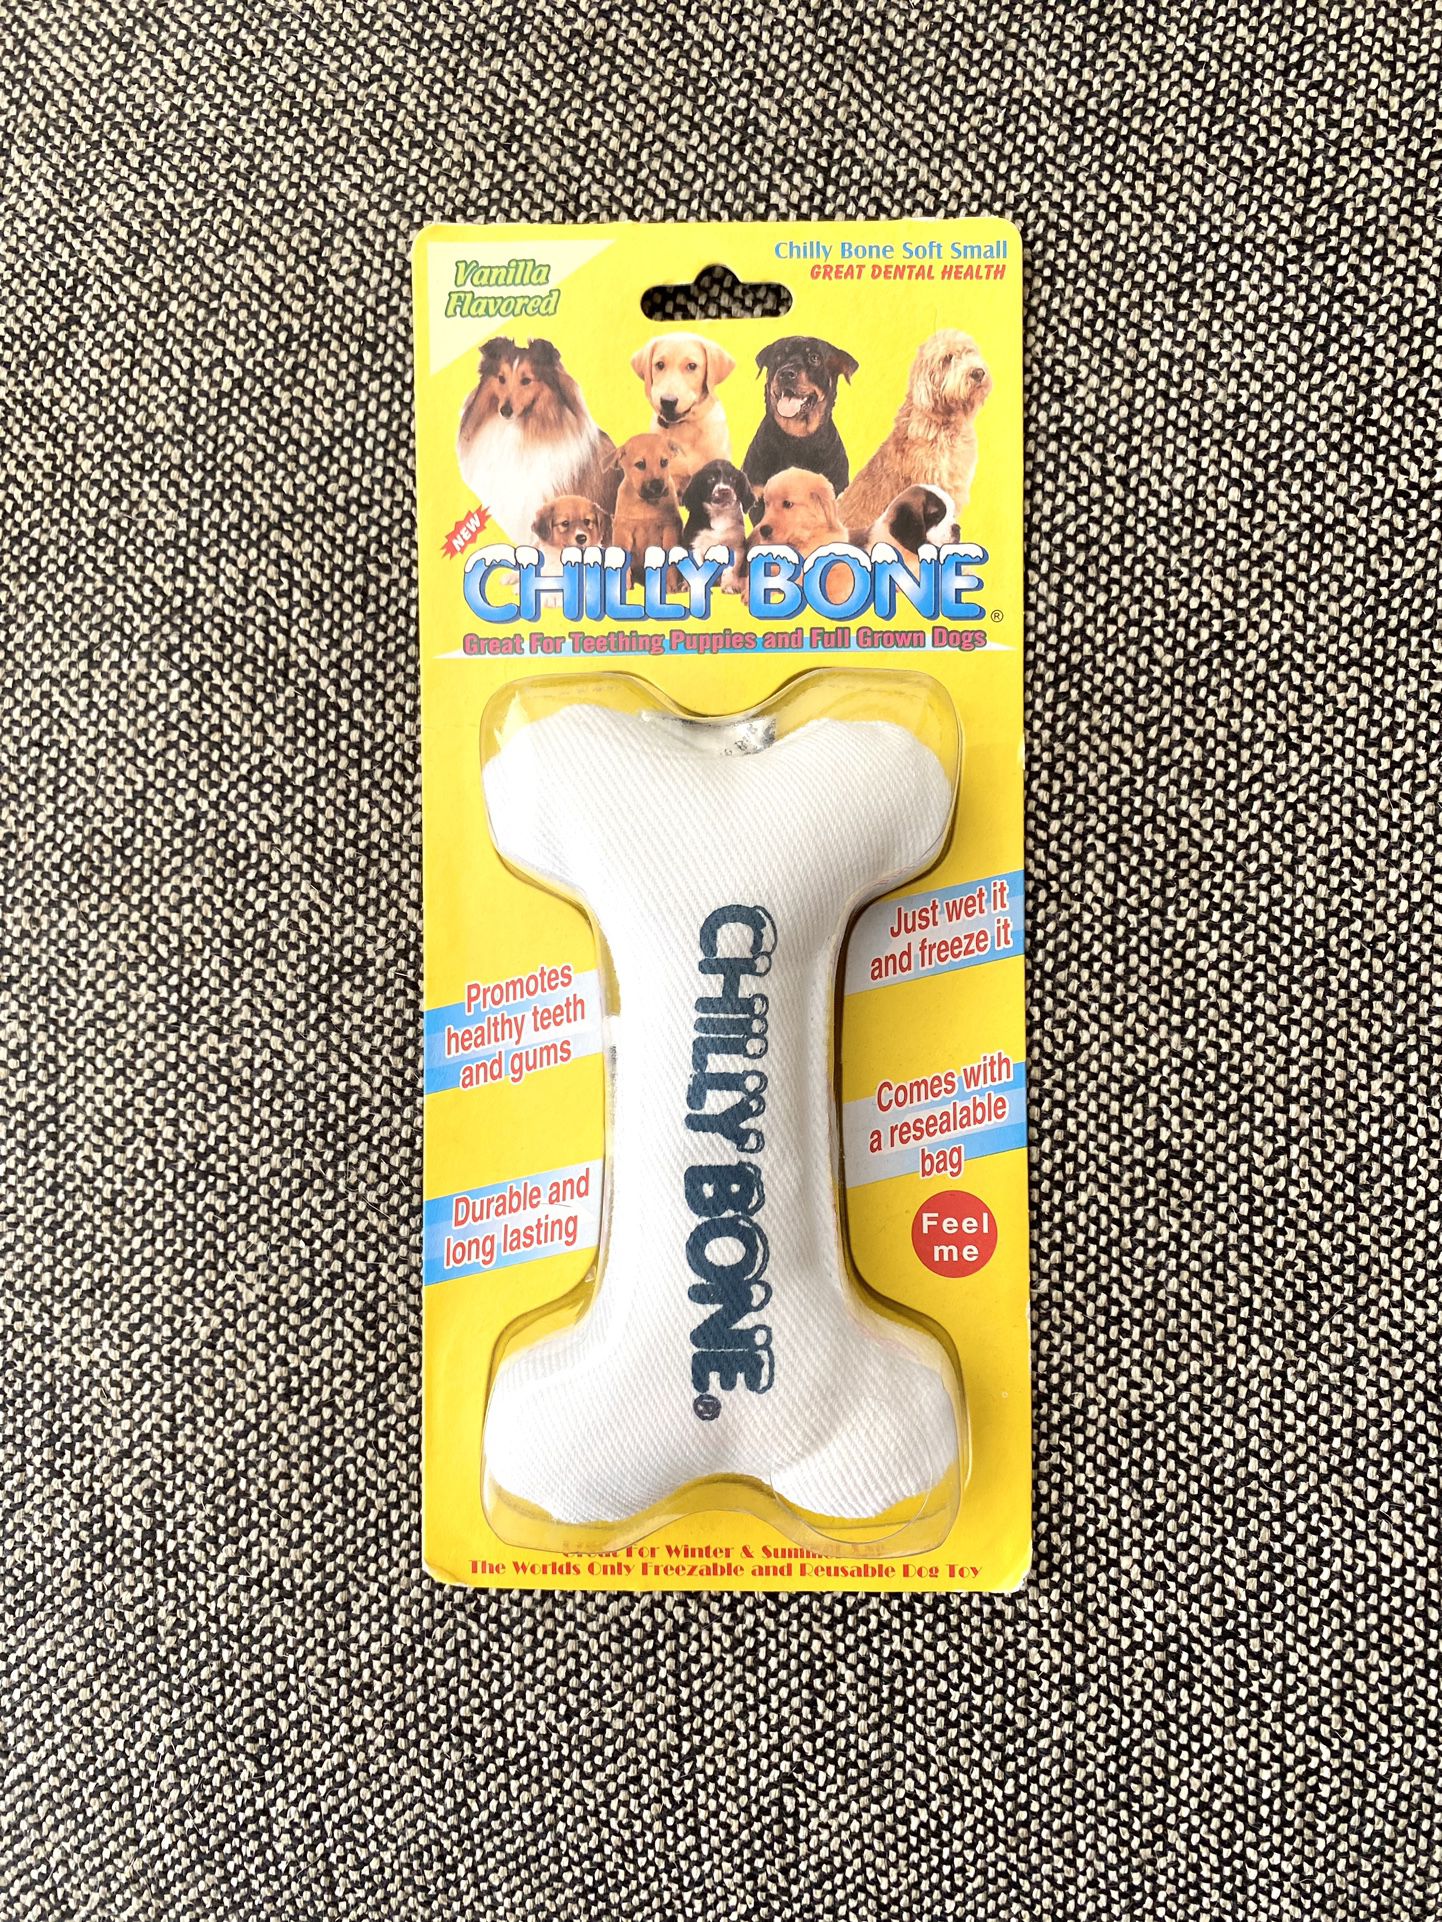 NEW Multipet Chilly Bone Chew / Teething Dog Toy - Small